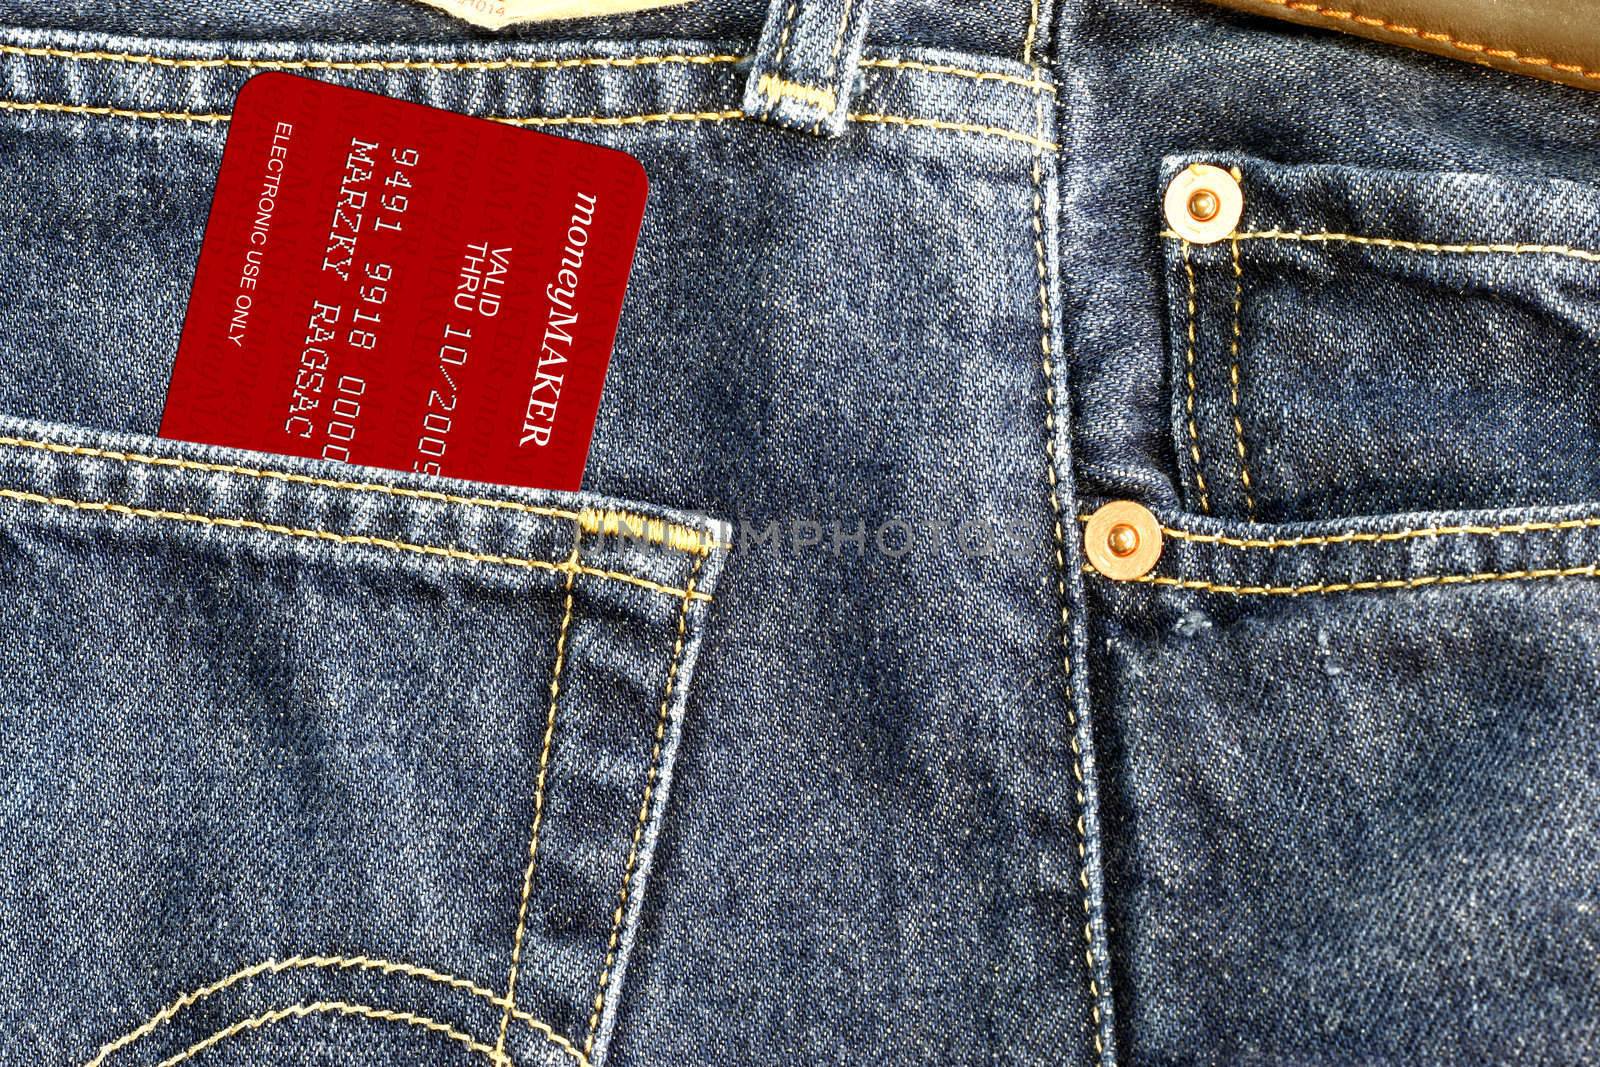 I have Credit Card concept with blue jeans, credit card is digital 3D high resolution and data is fiction.